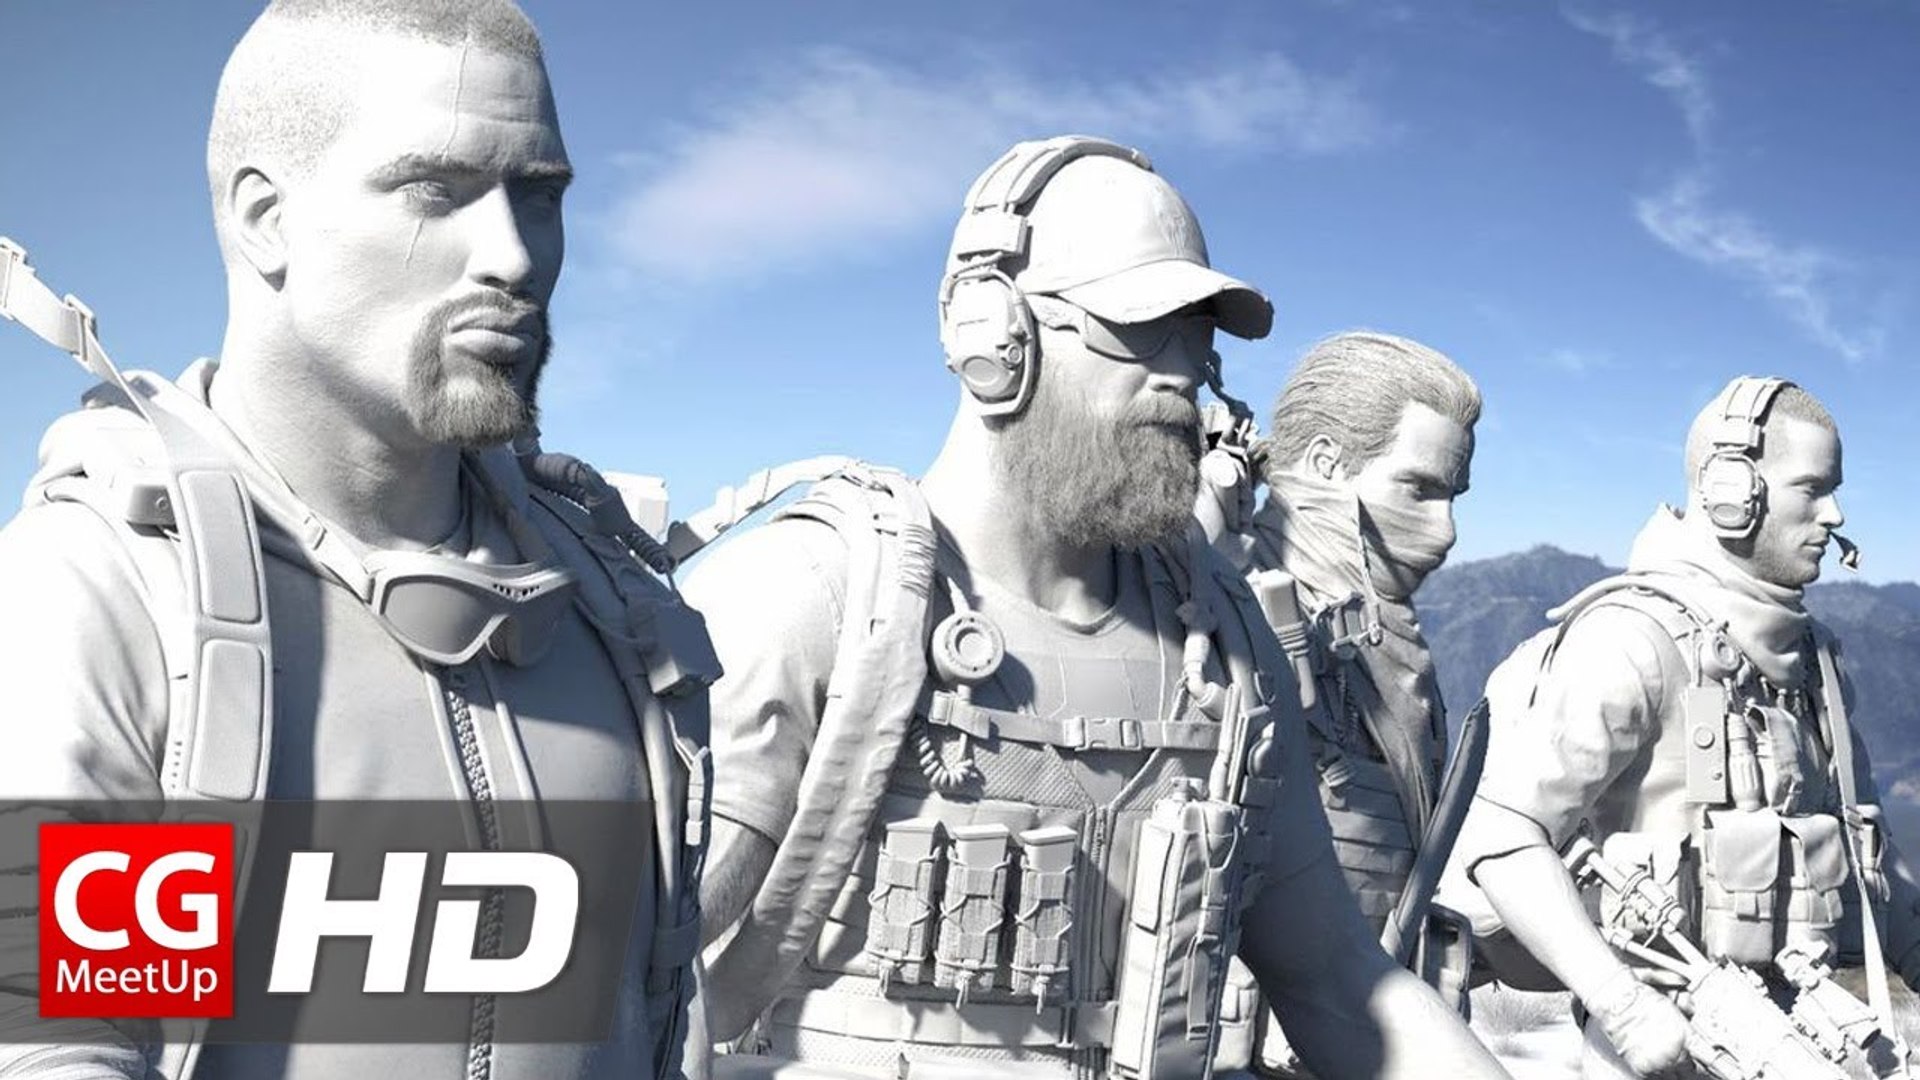 CGI 3D Breakdown HD "Making of Tom Clancy's Ghost Recon" by Mathematic  Studio | CGMeetup - video Dailymotion